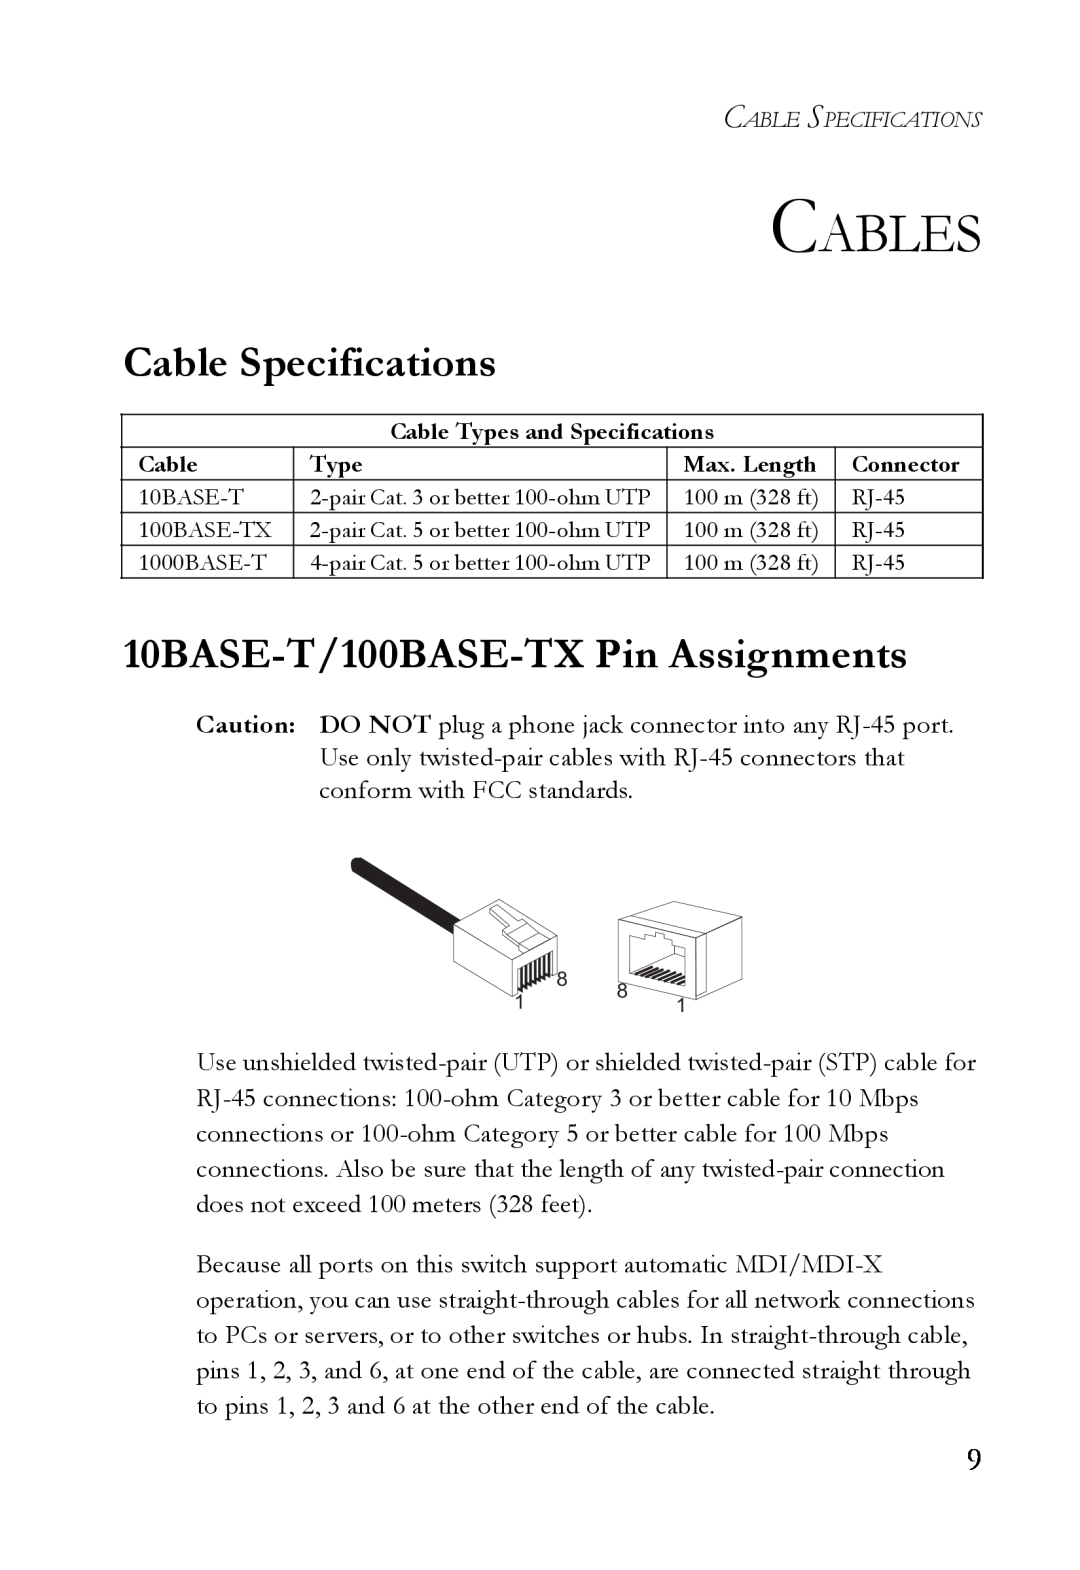 SMC Networks SMCGS24 manual Cables, Cable Specifications, 10BASE-T/100BASE-TX Pin Assignments 